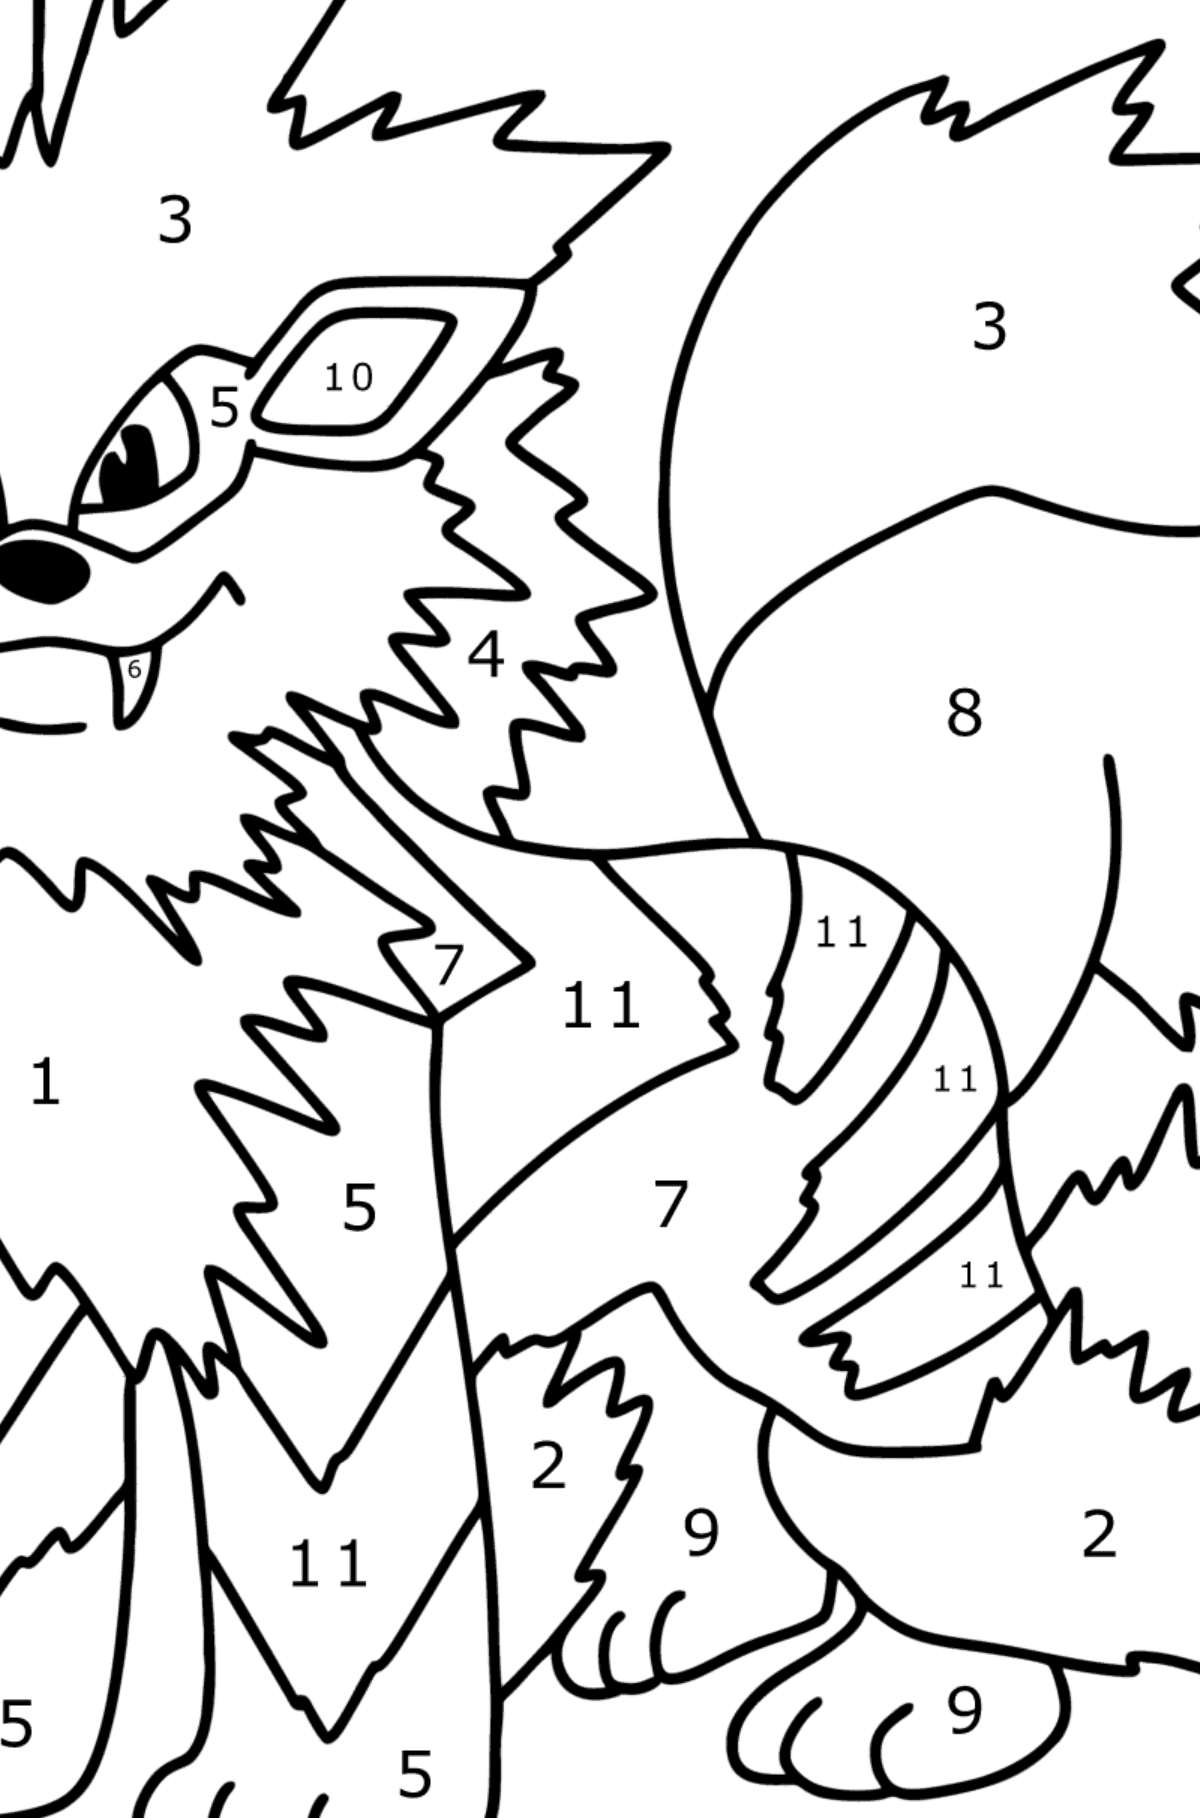 Pokémon Go Arcanine coloring page - Coloring by Numbers for Kids